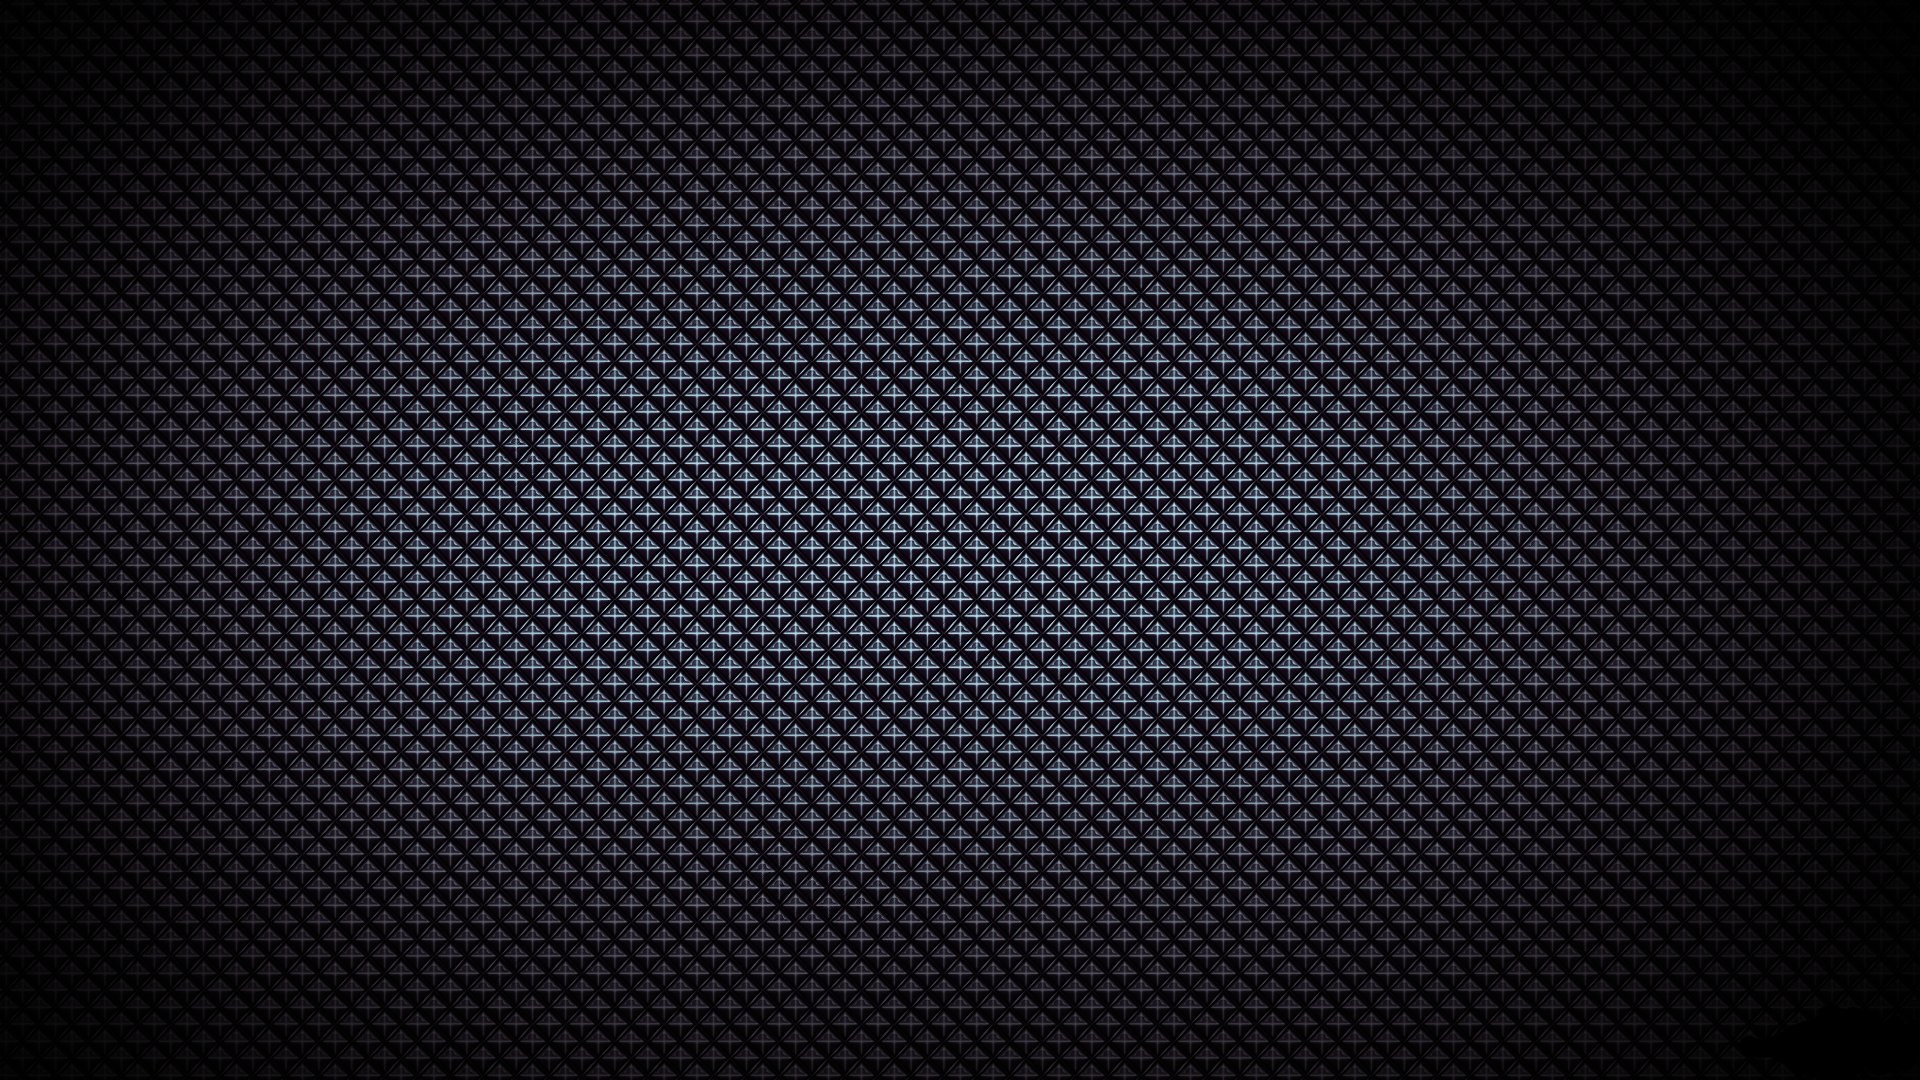 1920x1080 Cute Pattern Wallpapers For Computer Background 1920Ã1080